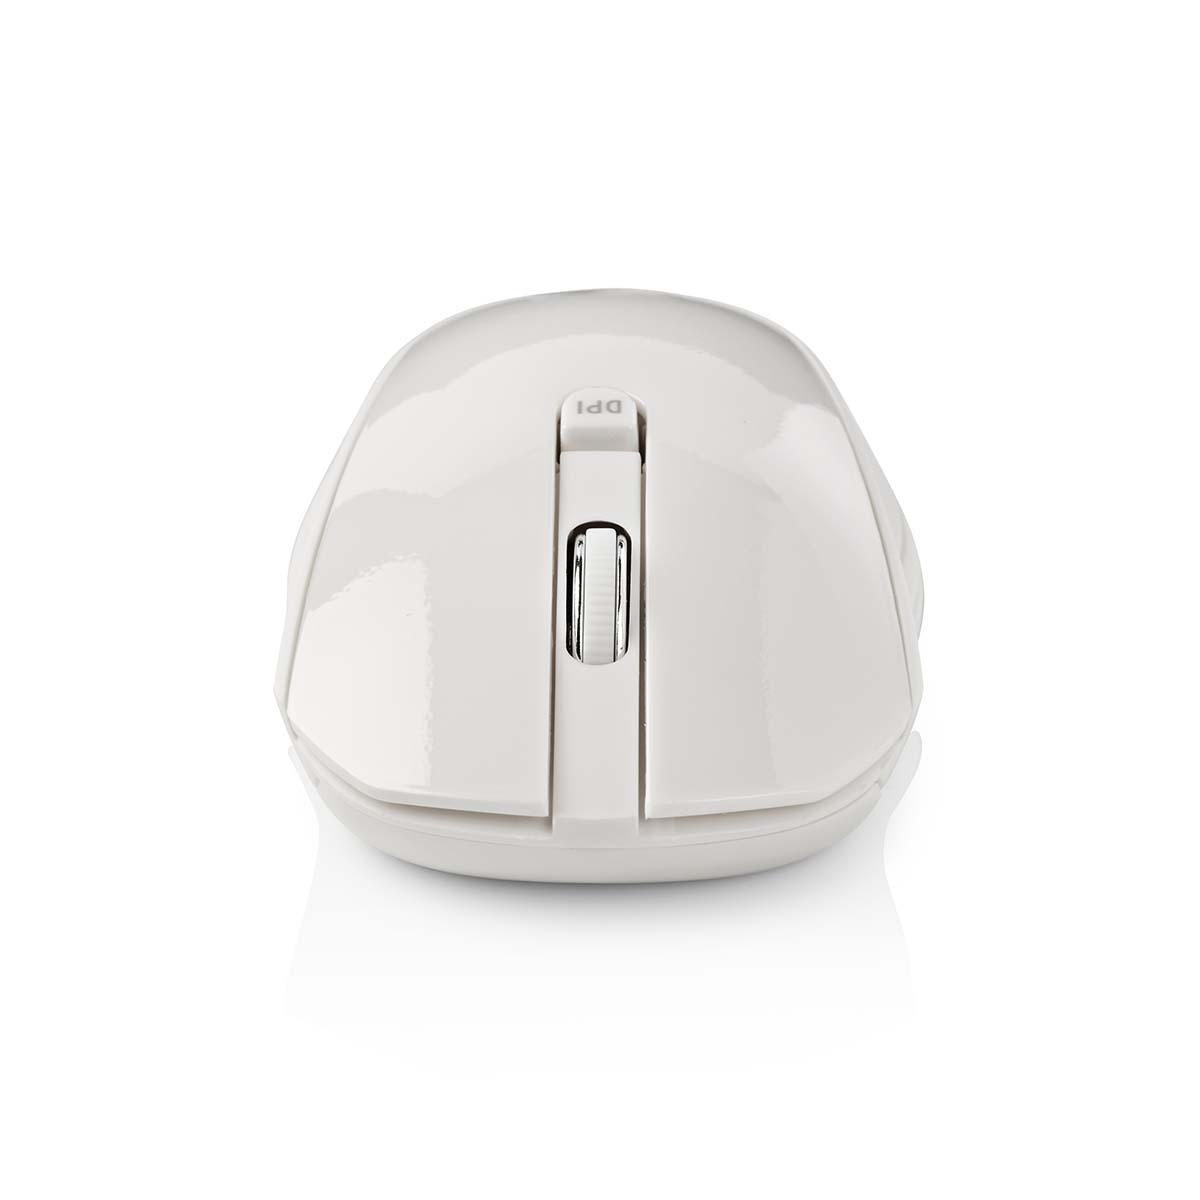 NEDIS MSWS400WT Mouse, Weiss